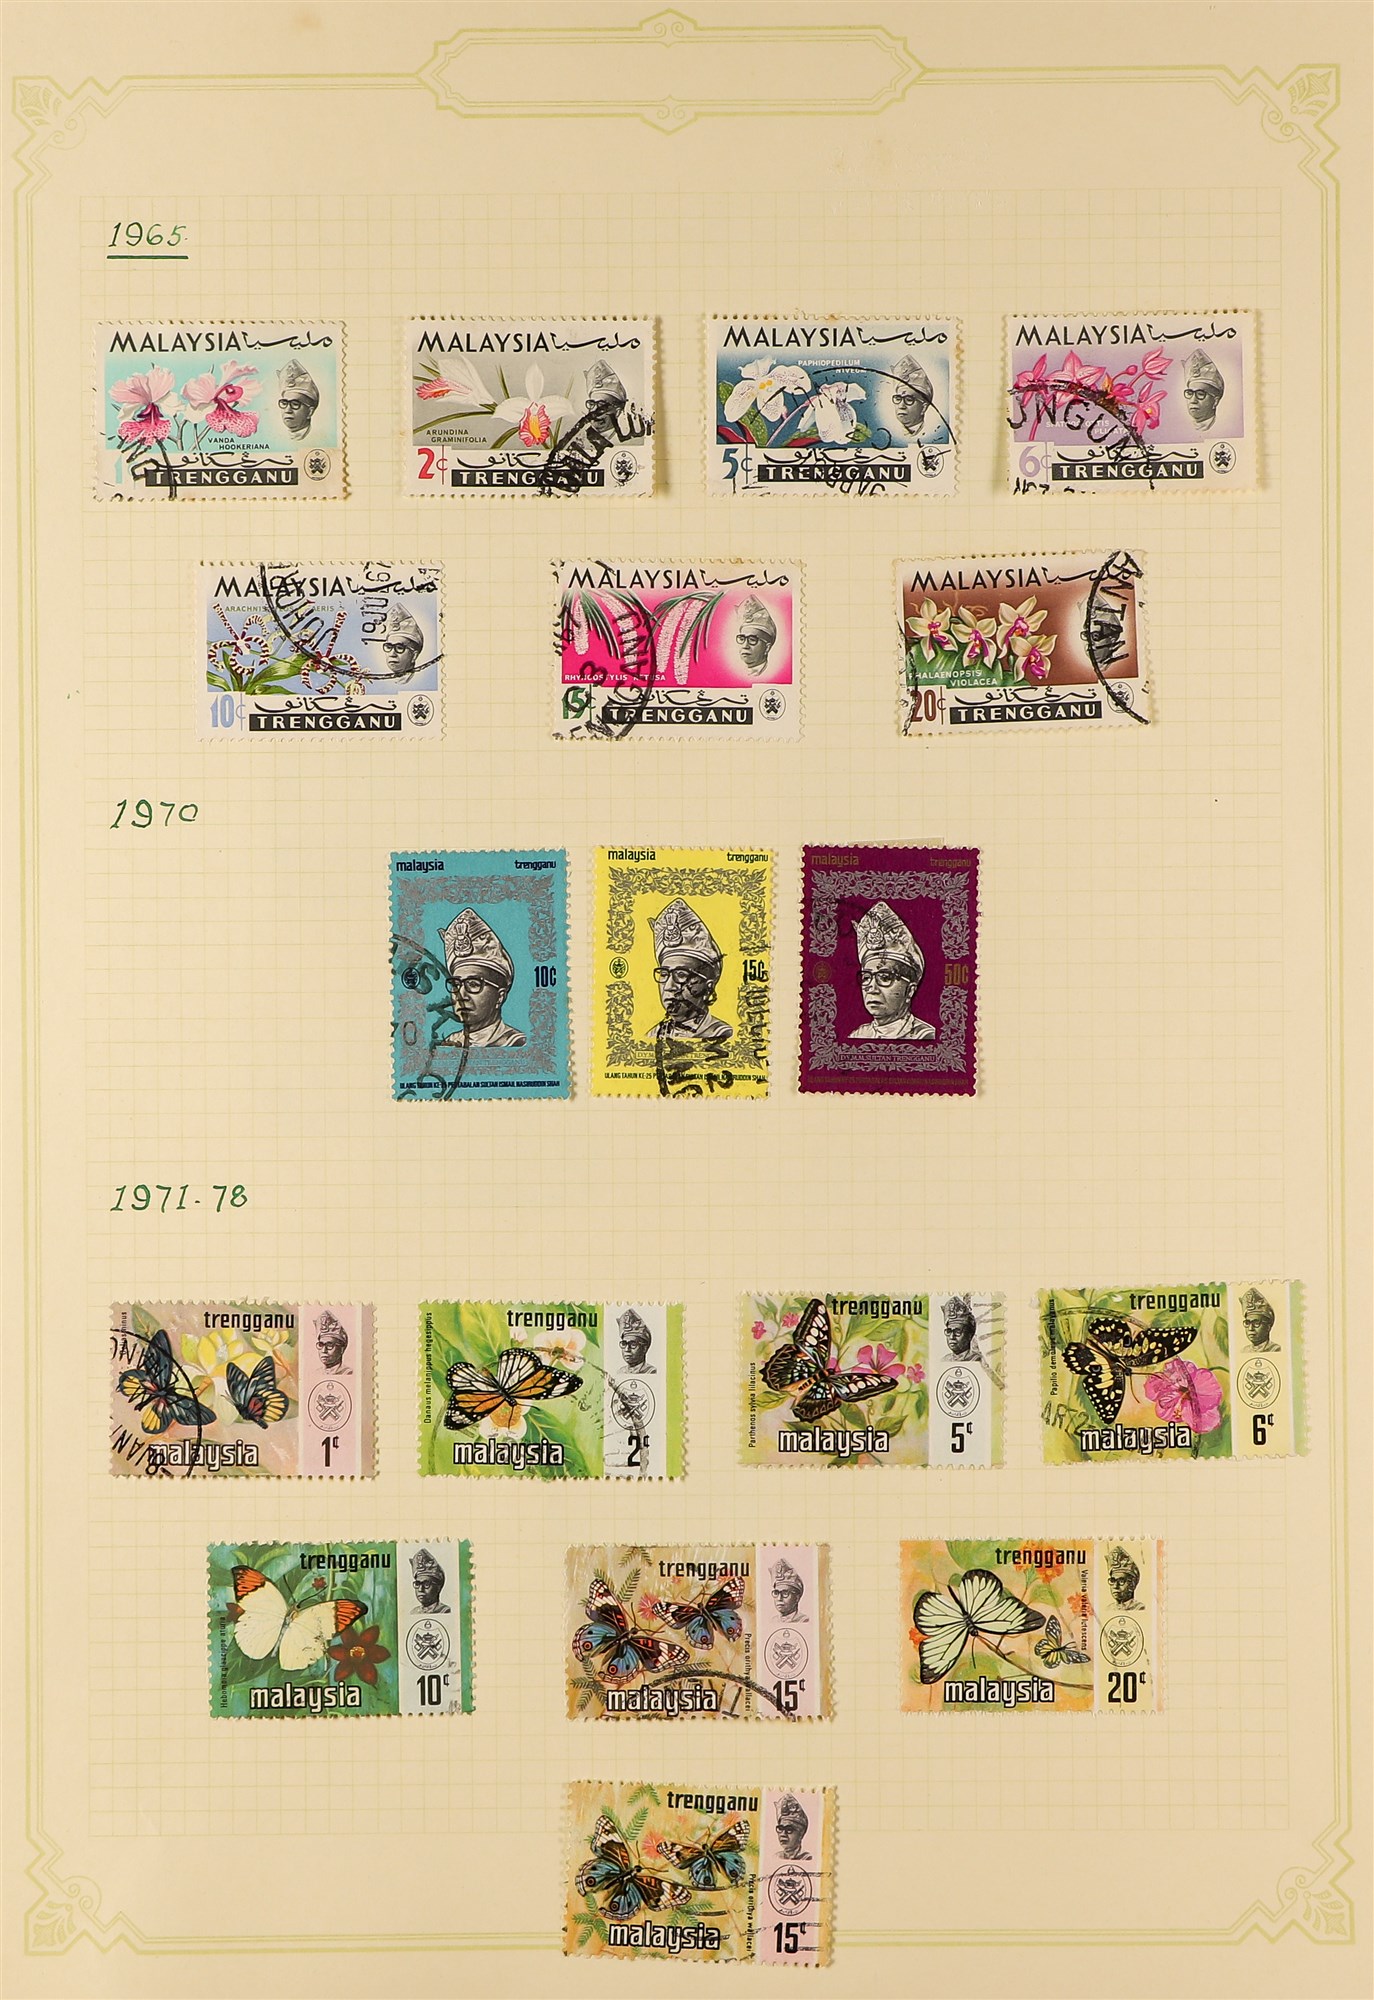 MALAYA STATES TRENGGANU 1910 - 1986 collection of 120+ used stamps on album pages, stc £900+ not - Image 6 of 8